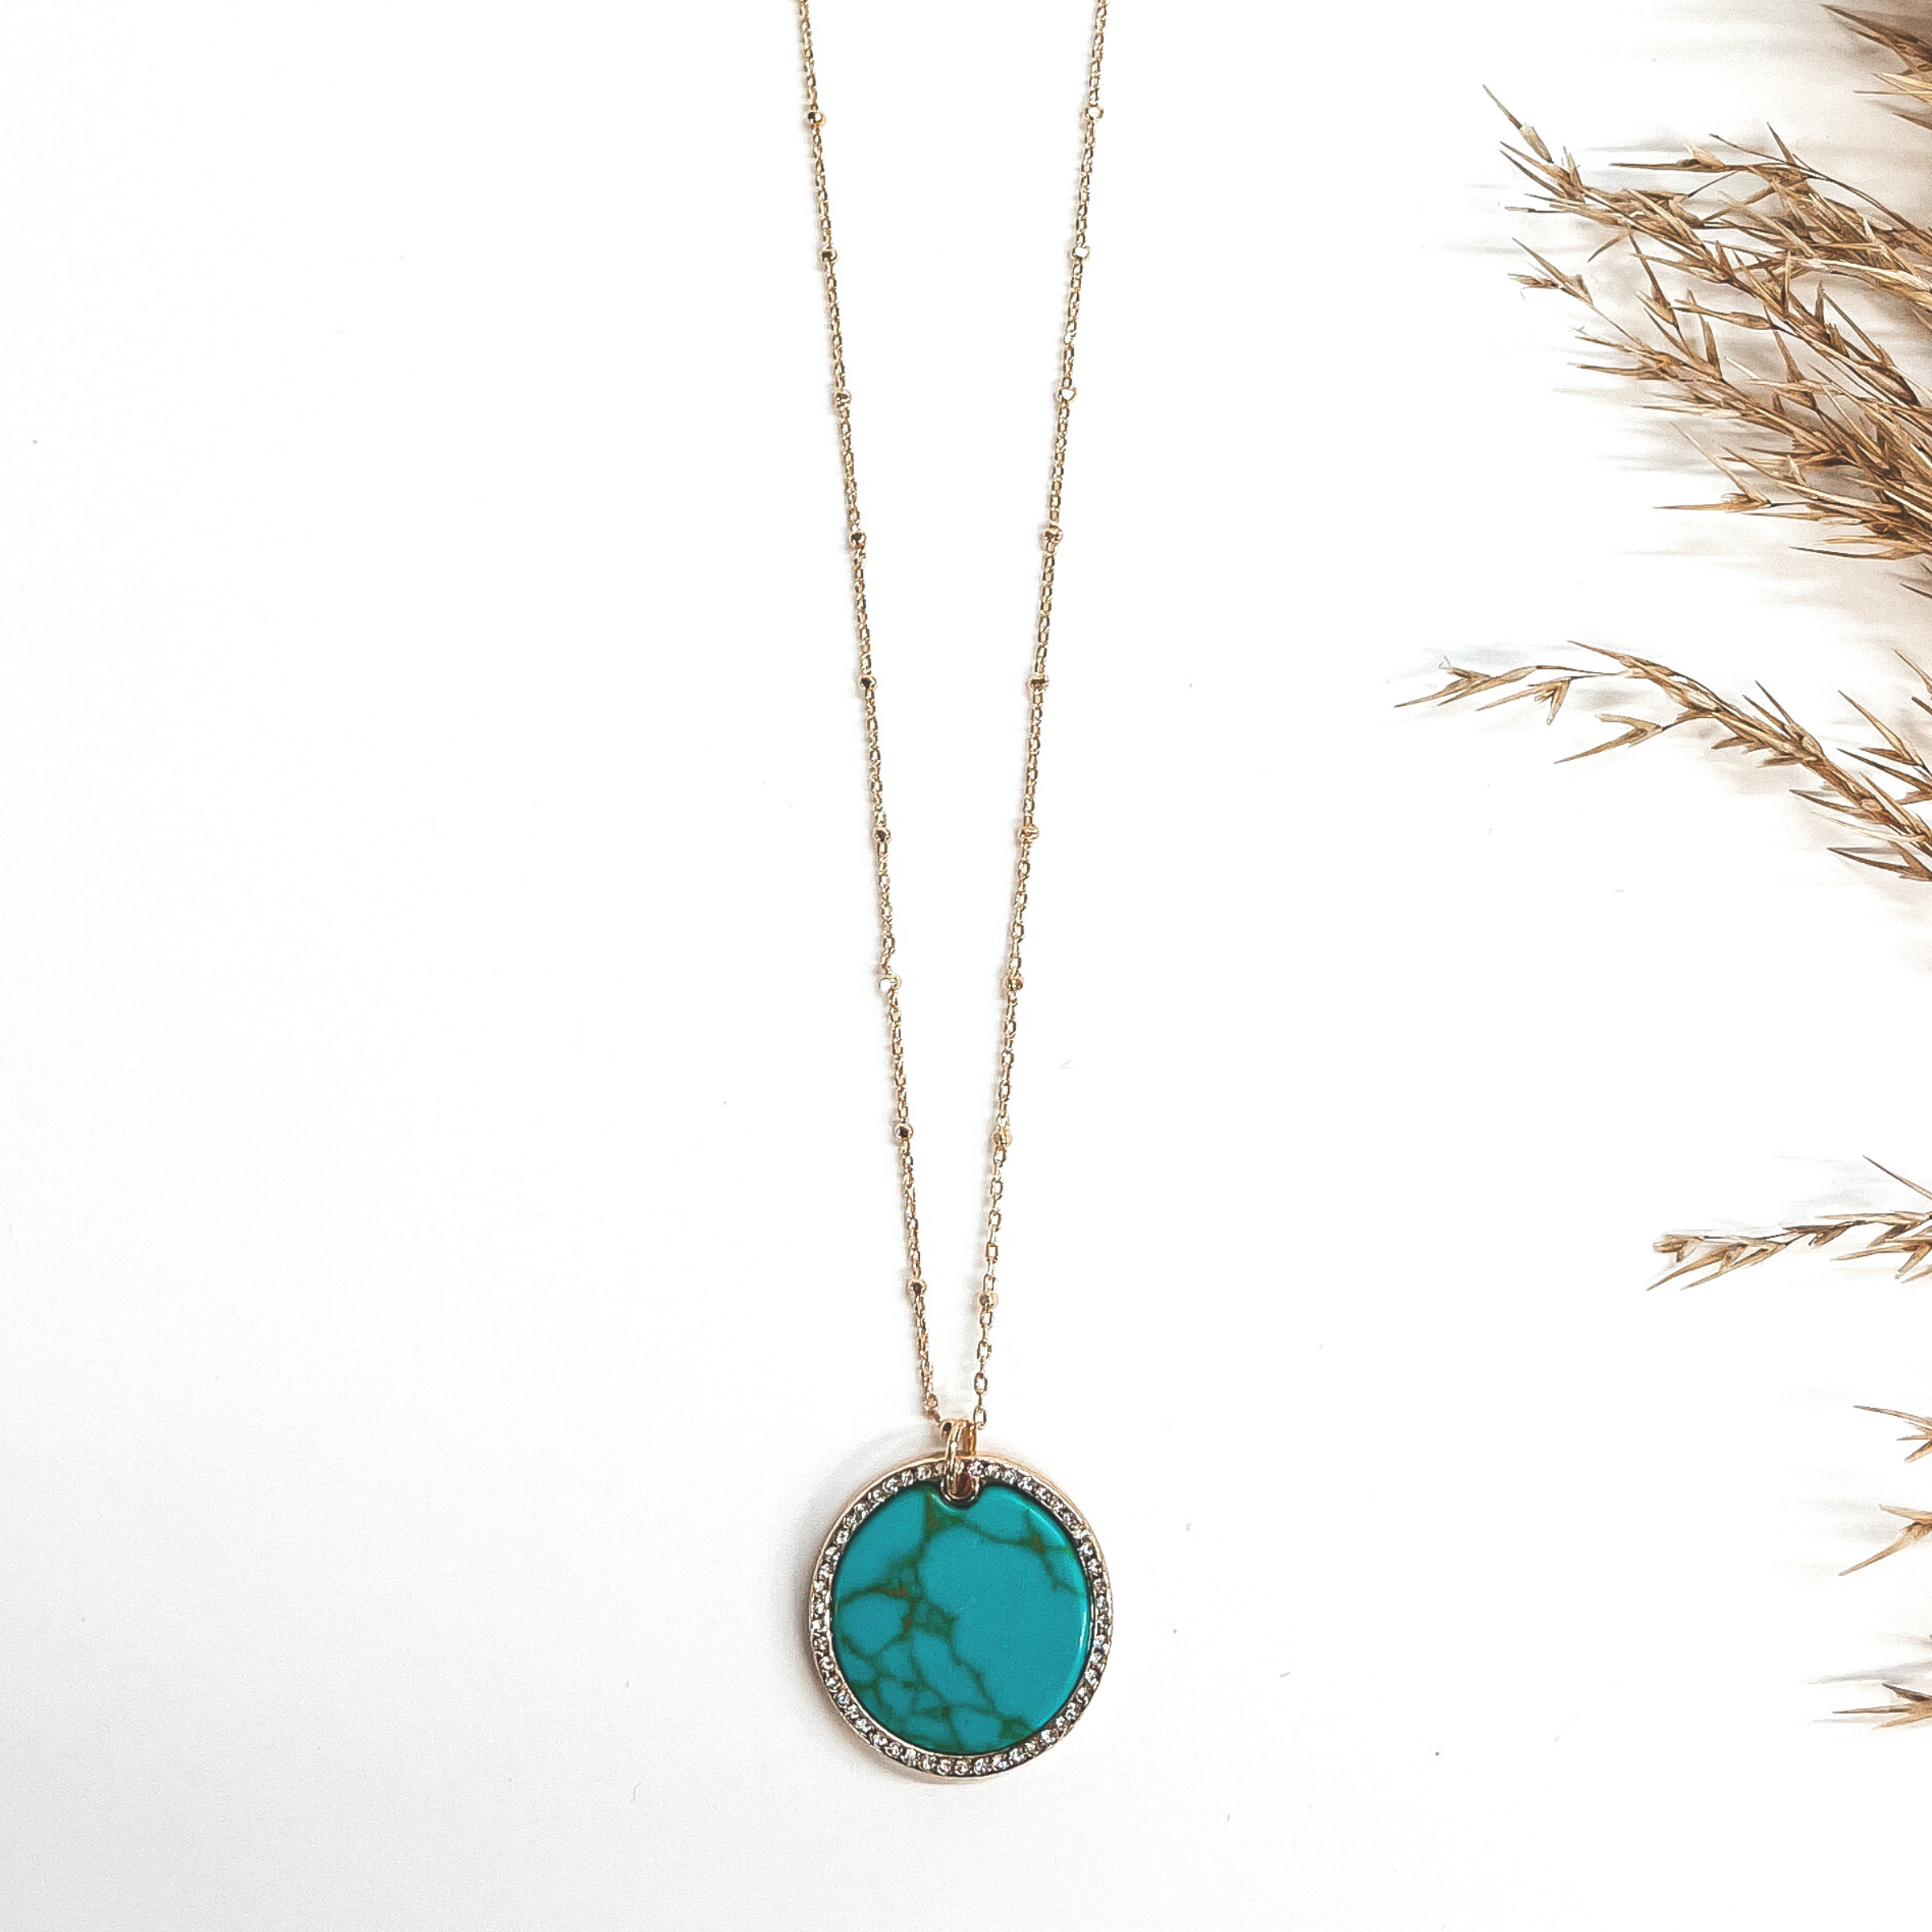 This a gold chain necklace with a circle pendant, the  circle pendant is a semi-precious stone in turquoise.  The stone pendant is in a gold settings and has CZ  crystals around. The chain has gold spacers. This is  taken on a white background with a brown plant in the  side as decor.